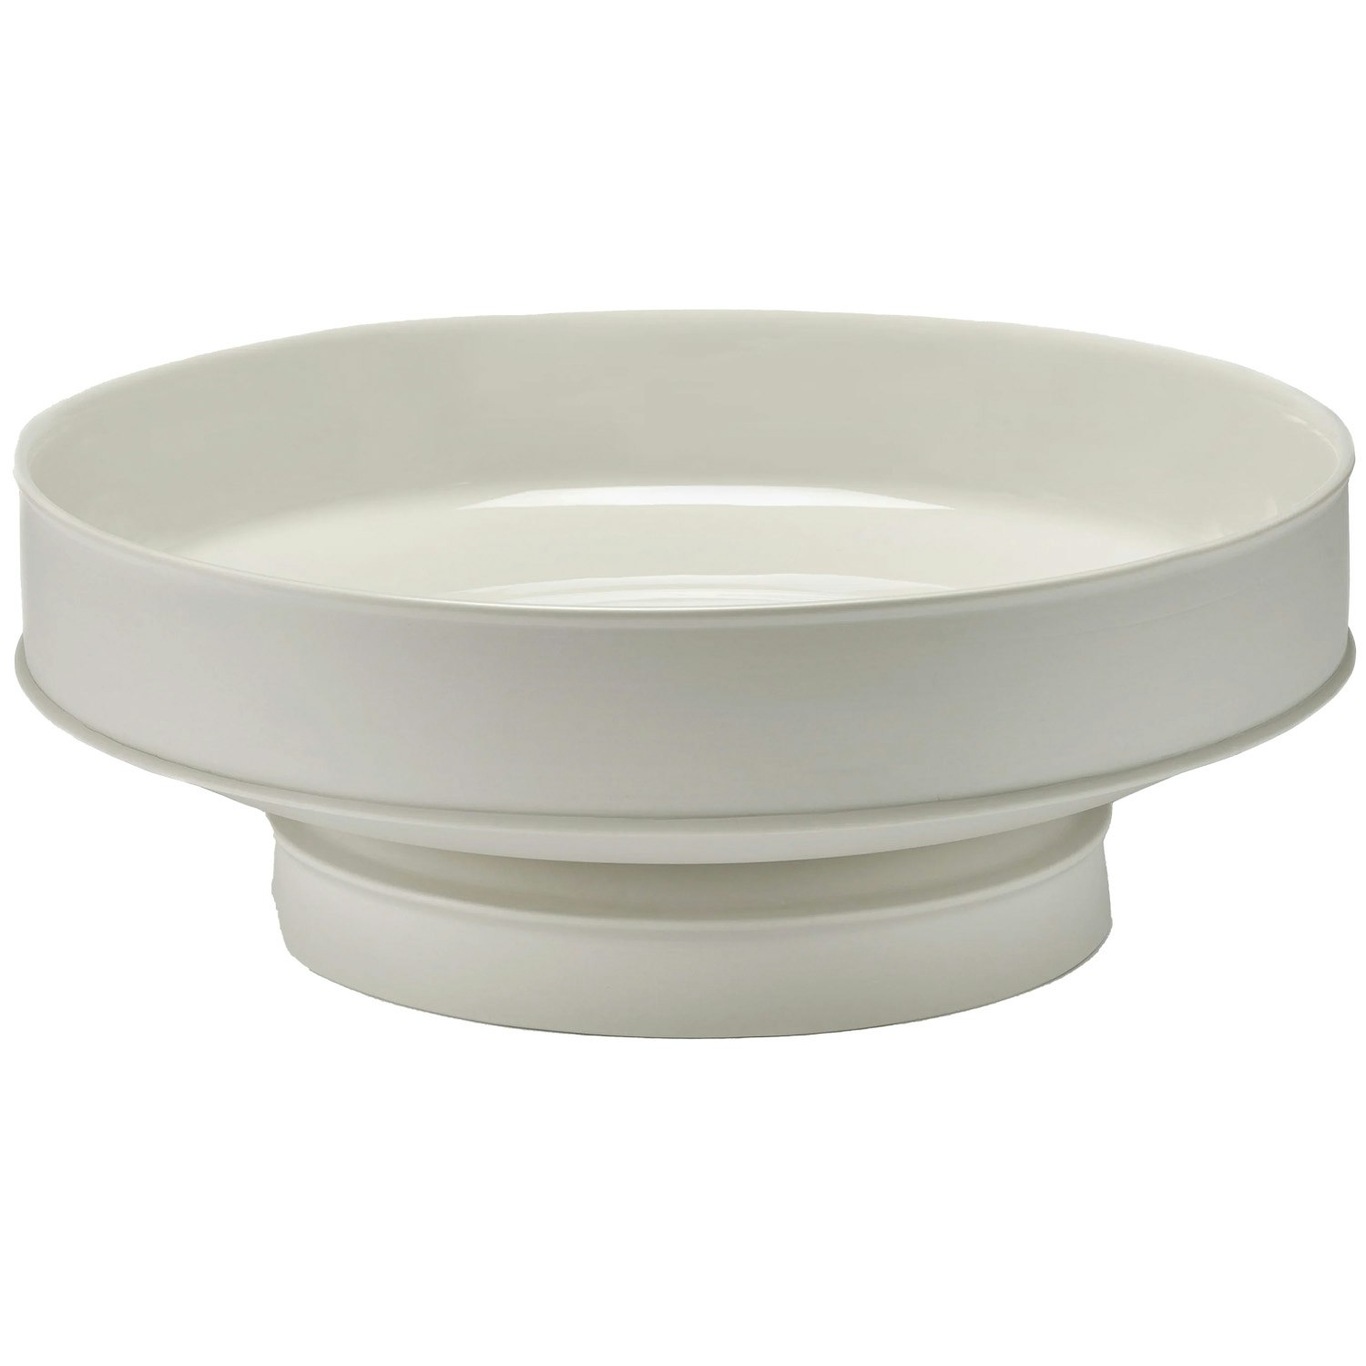 Dune Serving Bowl With Foot